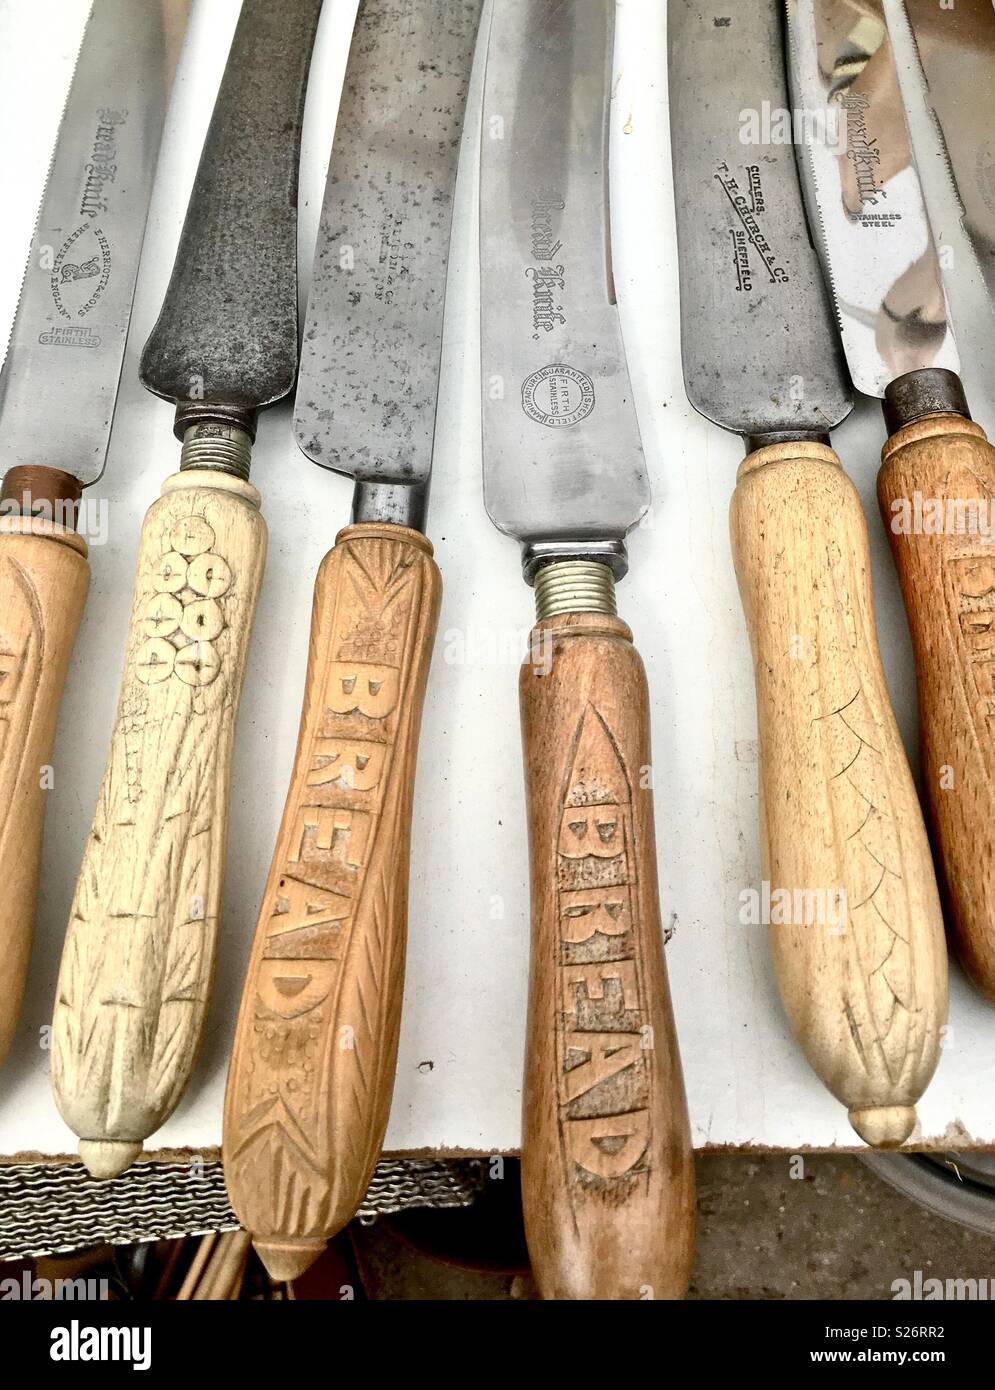 Antique bread knives on white table Stock Photo - Alamy